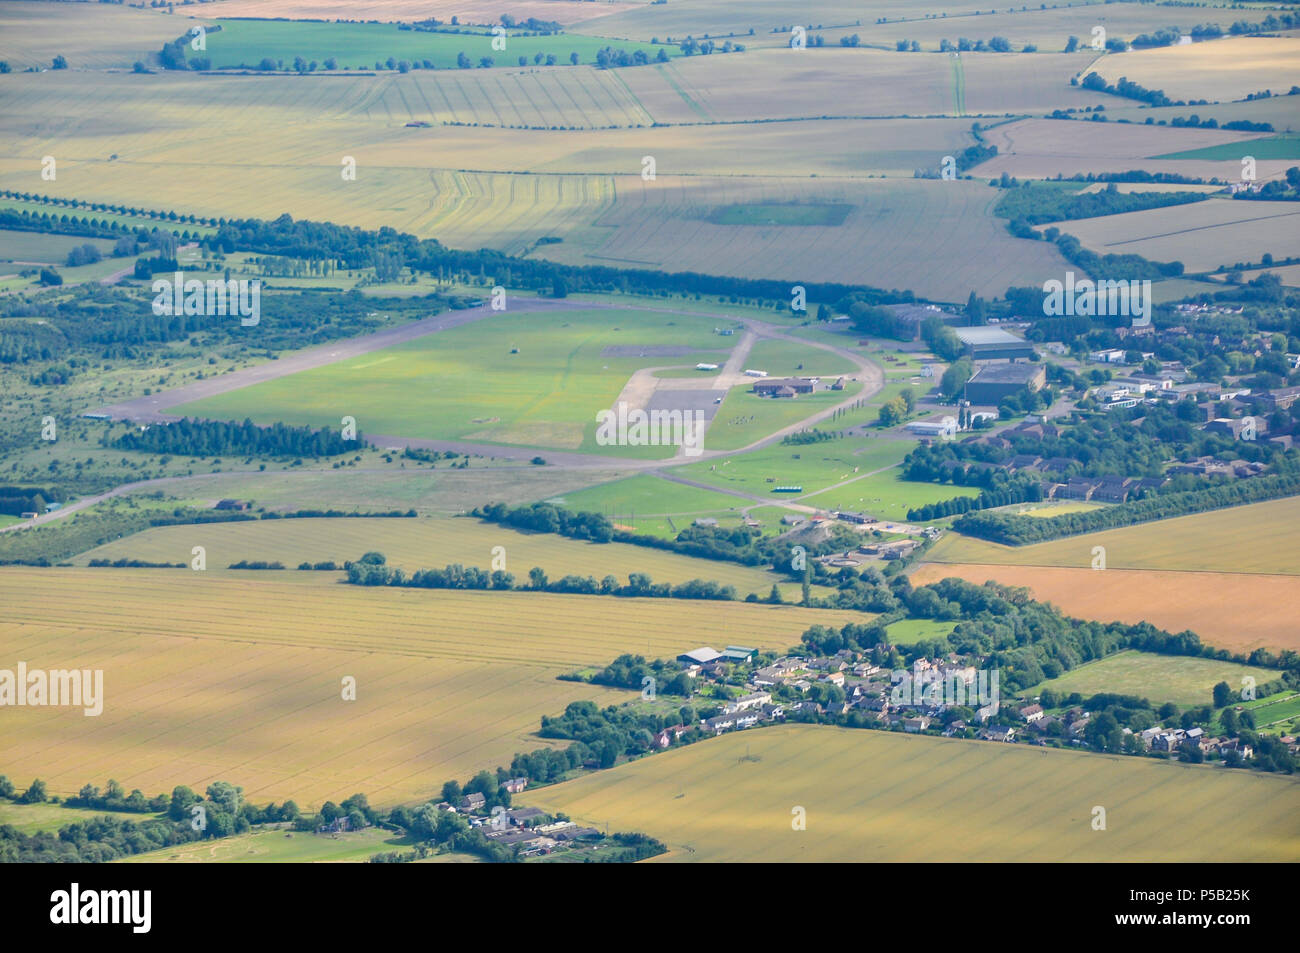 RAF Bassingbourn is a former Royal Air Force station located in Cambridgeshire. Aerial view showing airfield and surrounding areas Stock Photo